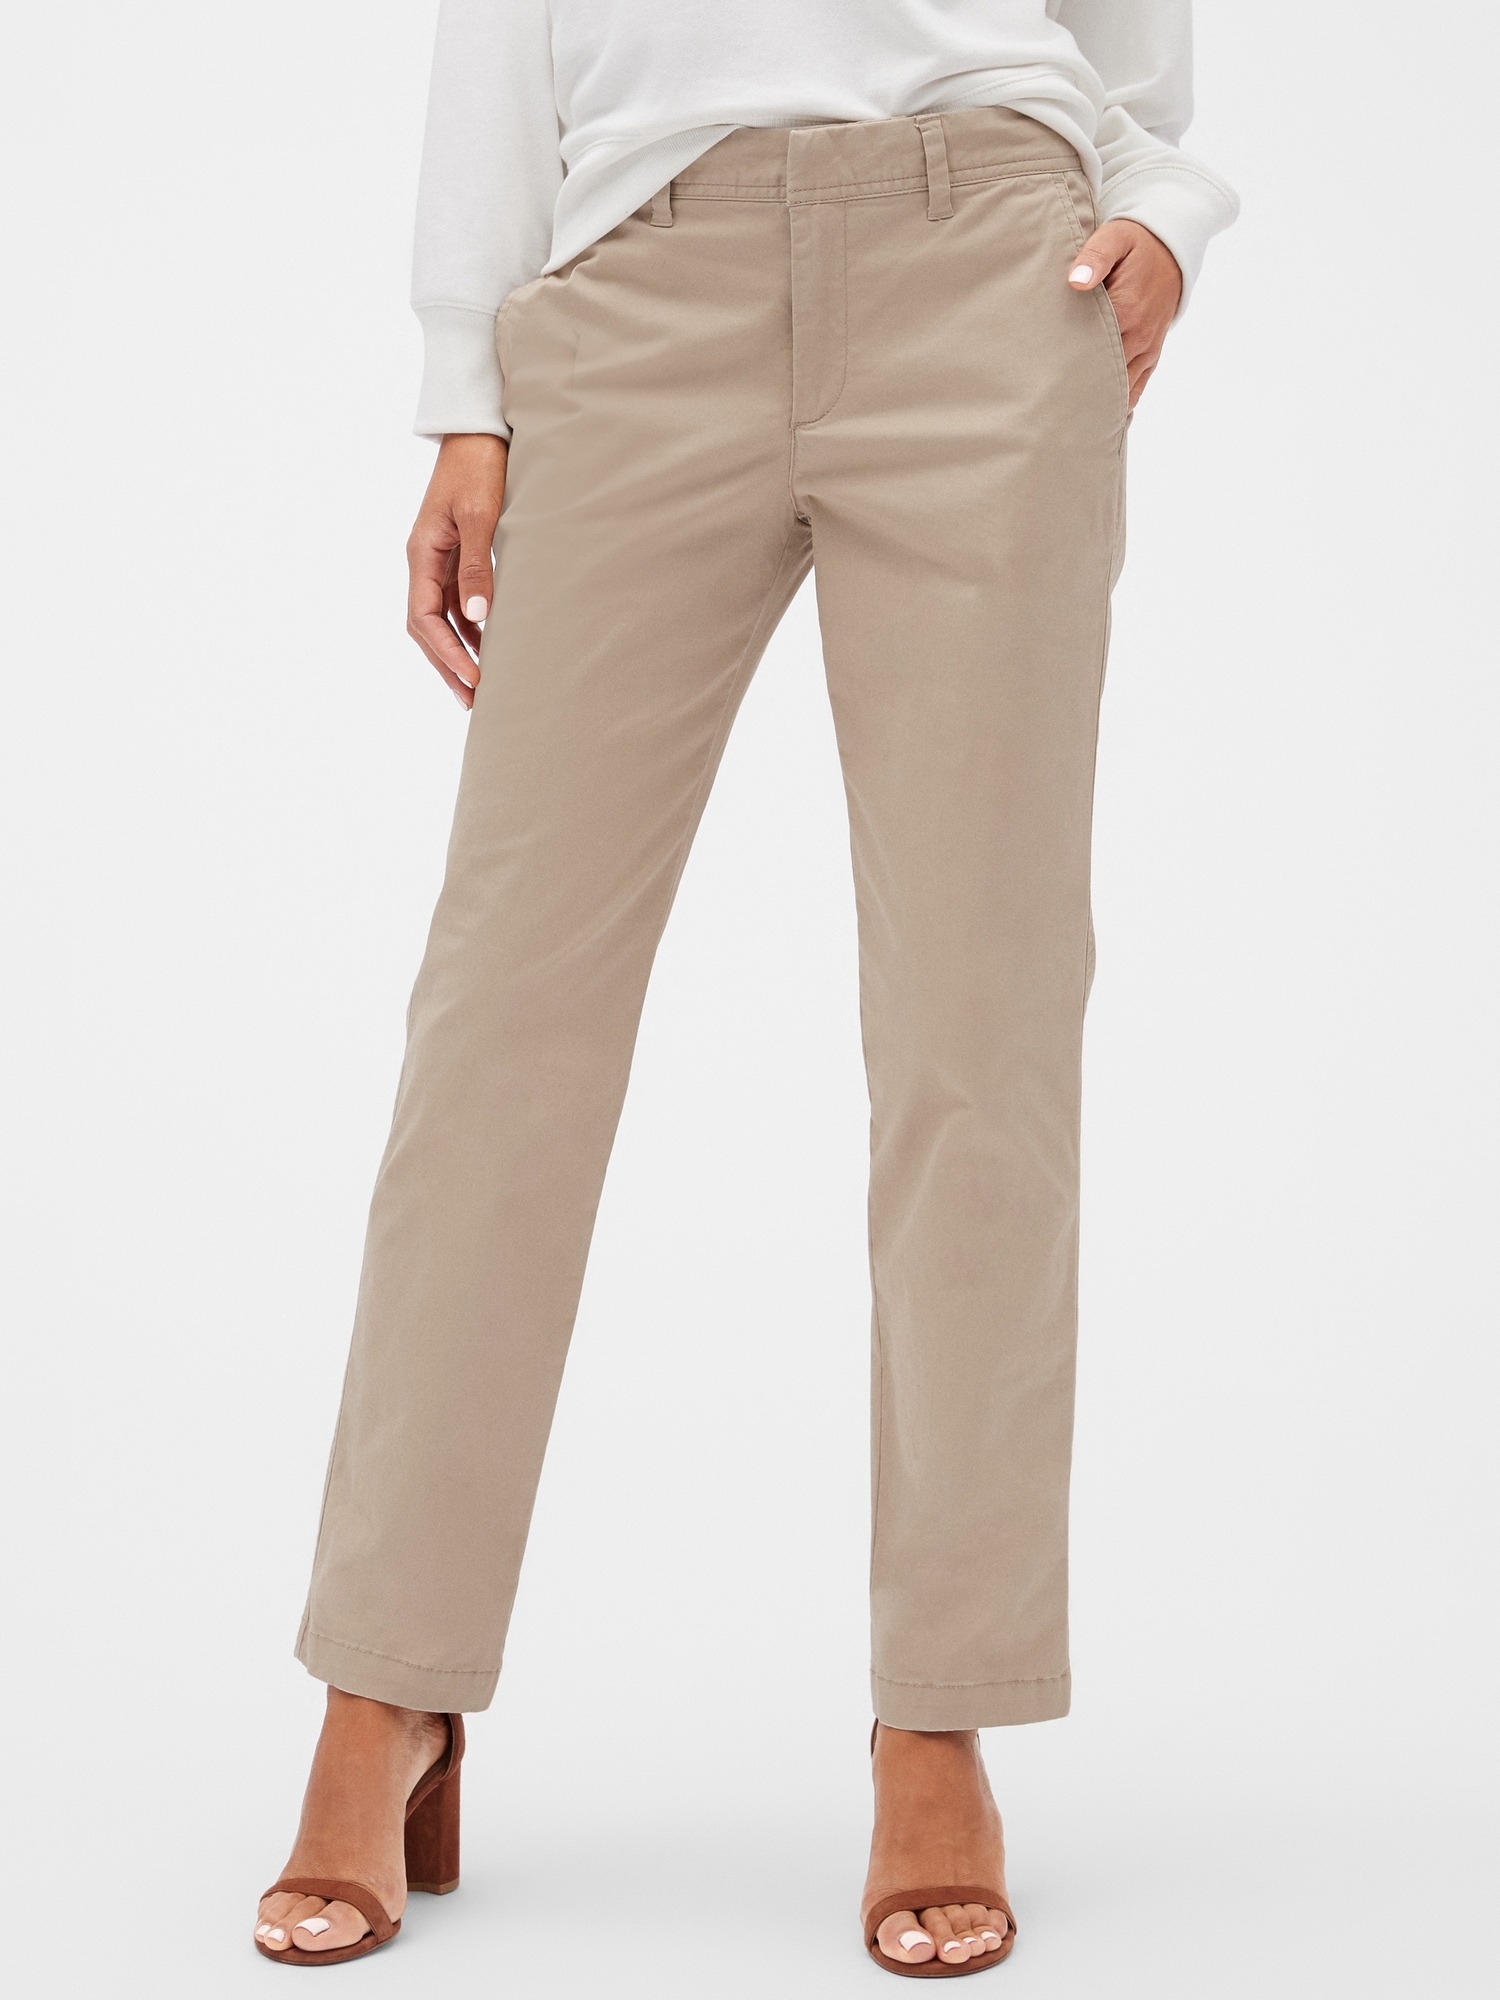 Mid Rise Khakis in Straight Fit | Gap 